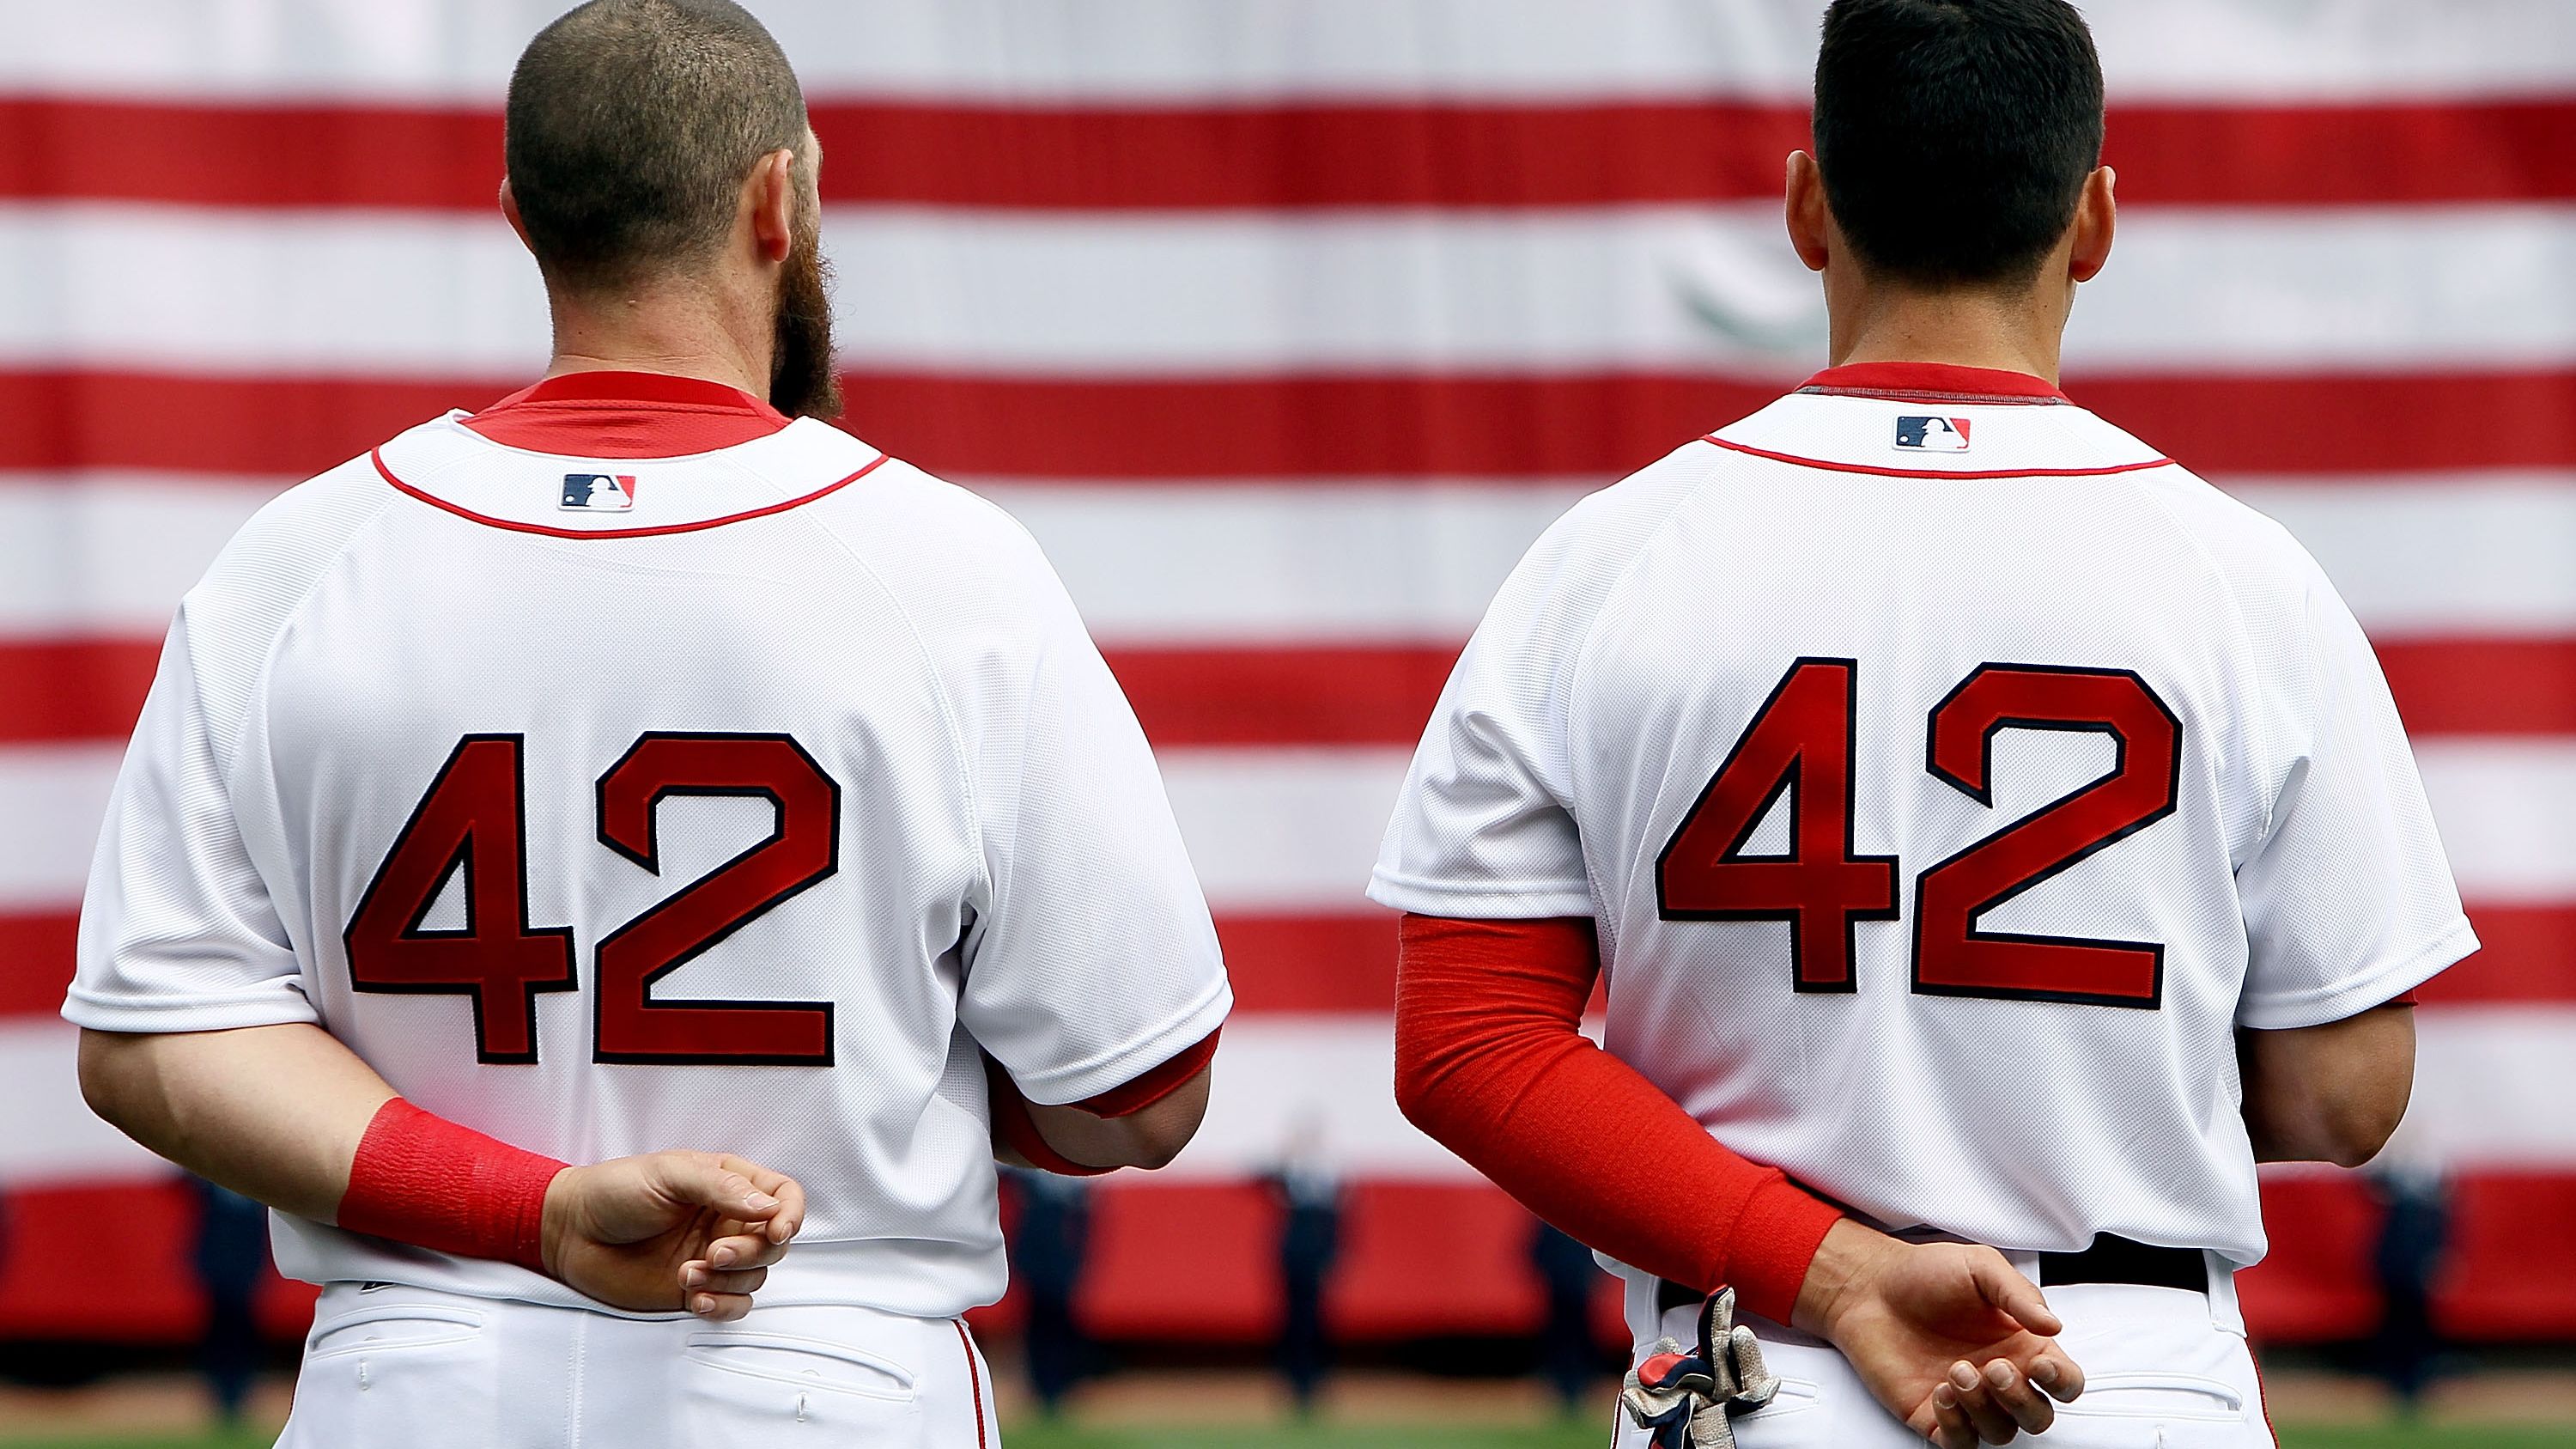 LEADING OFF: Jackie Robinson Day, Red Sox go for 10th in row, The Mighty  790 KFGO